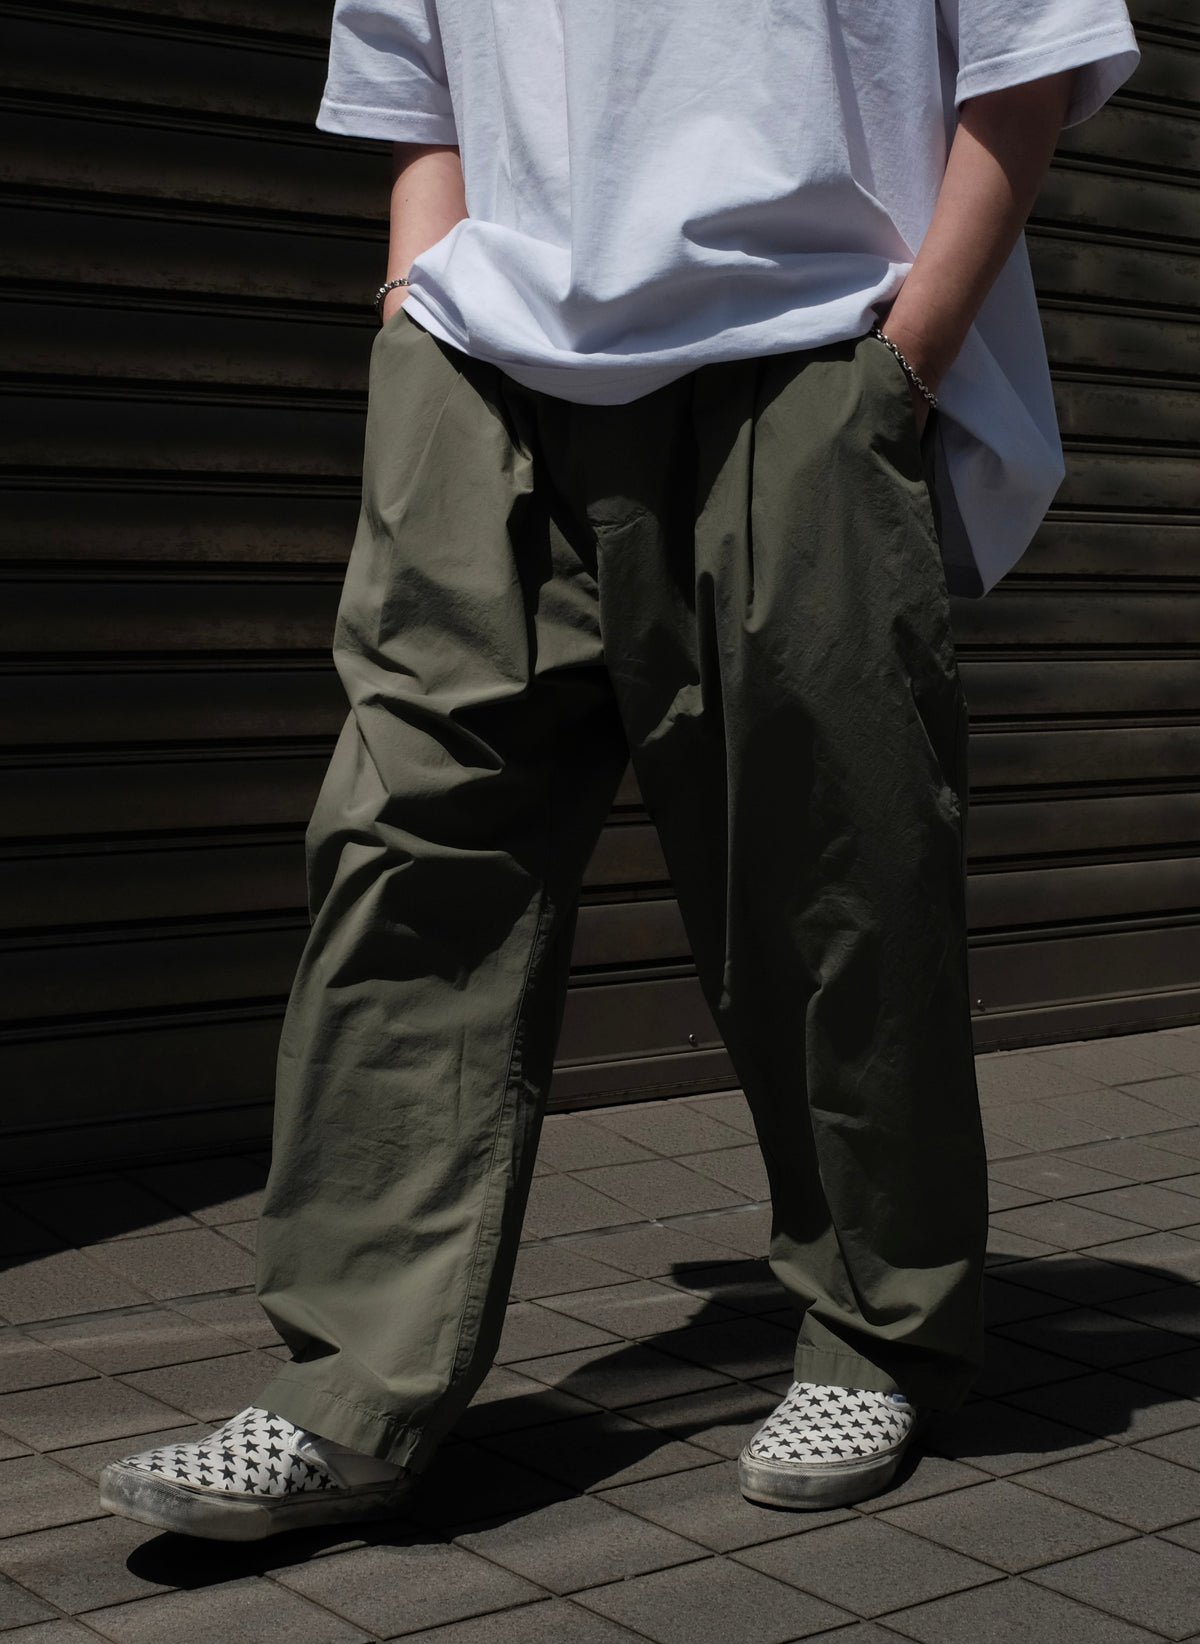 <span style="color: #f50b0b;">Last One</span> 
GREI. / PLEATED CRUISER PANT ENZYME WASHED POPLIN ARMY GREEN